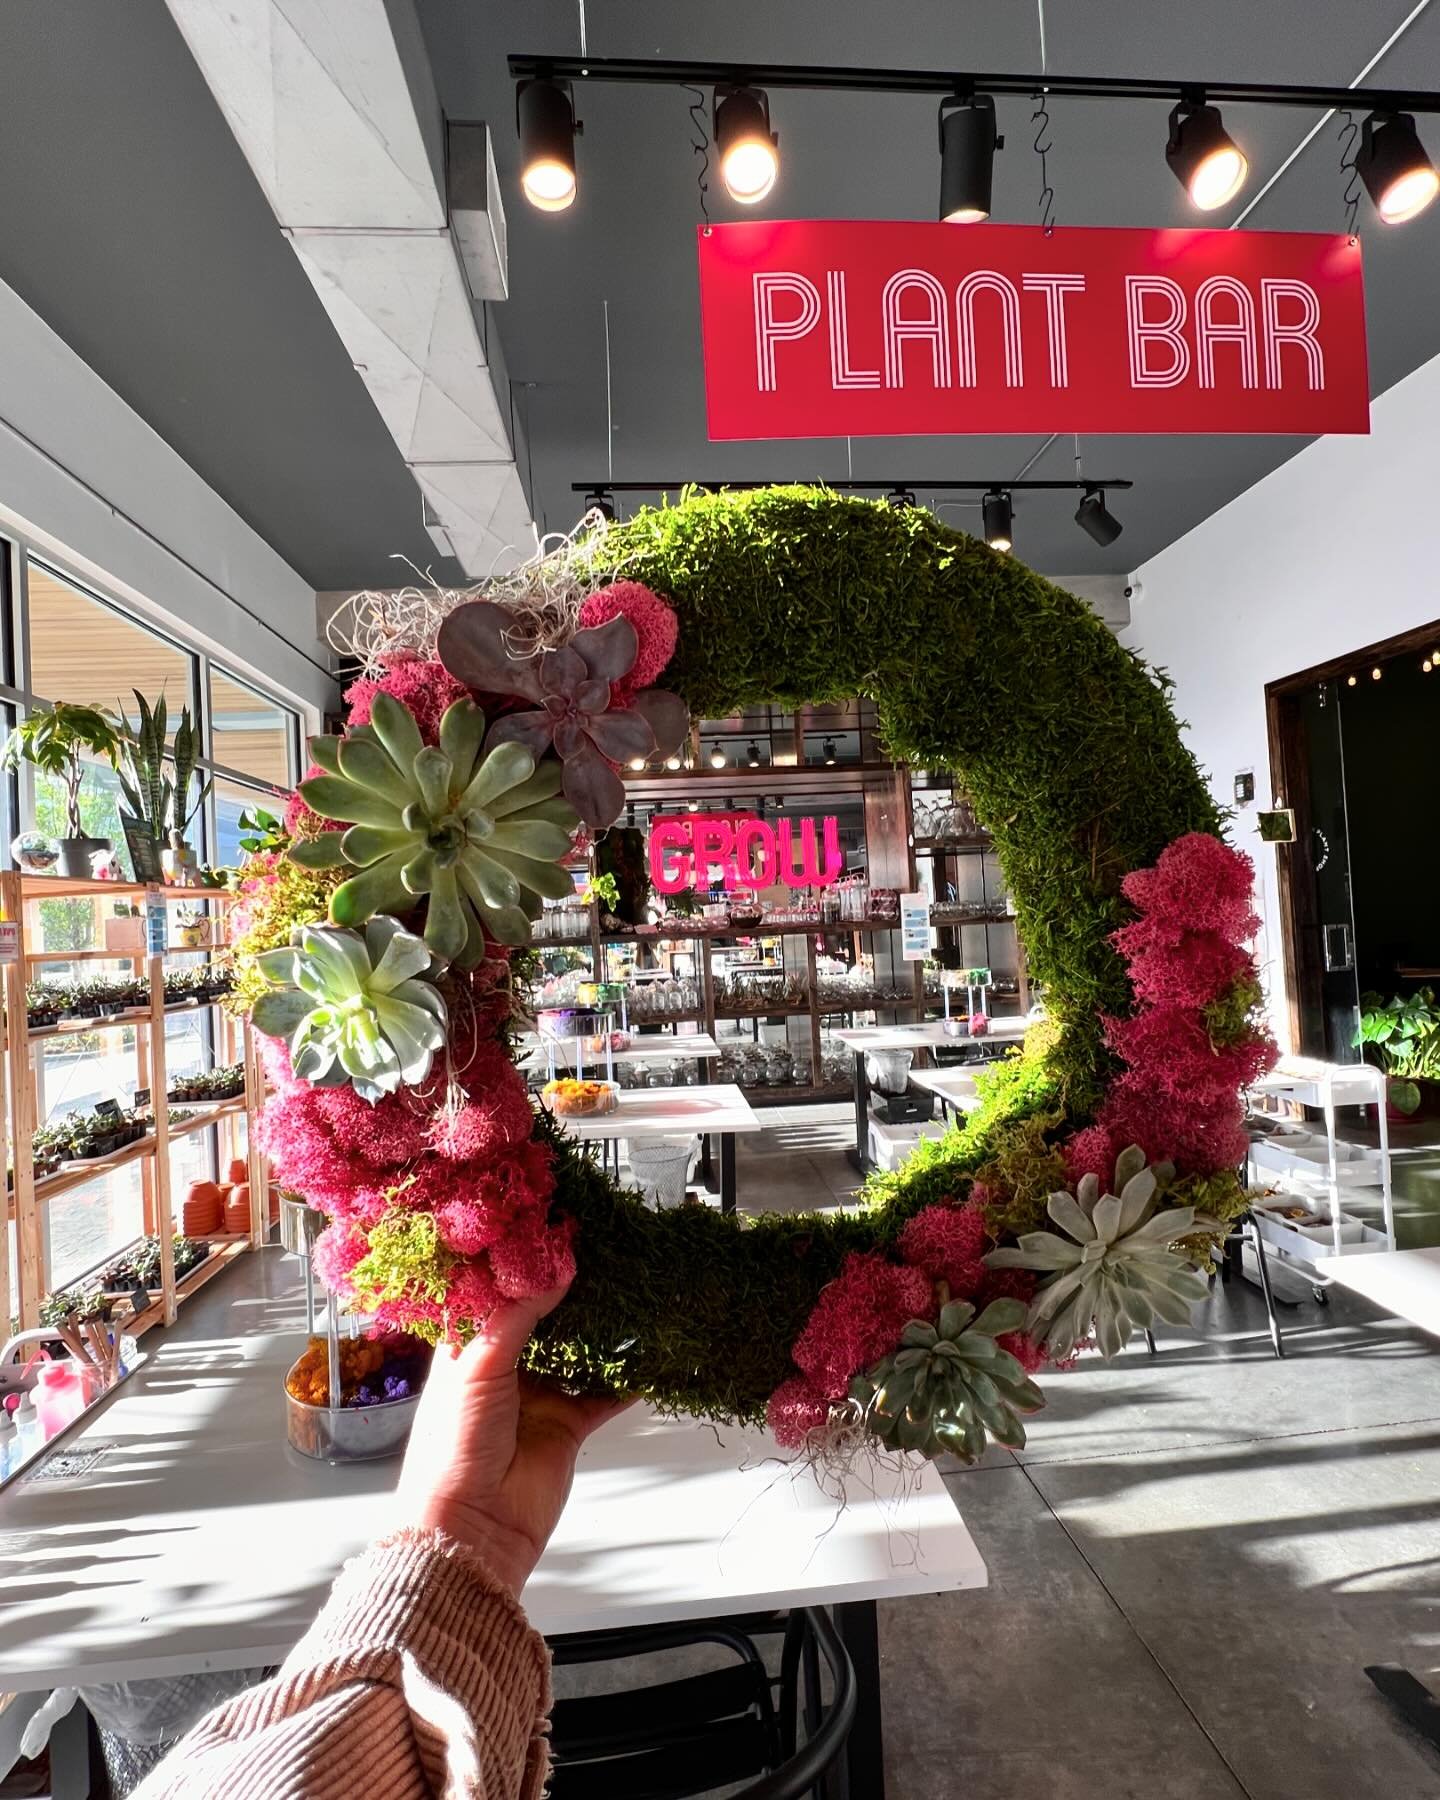 🌿It&rsquo;s Succulent Wreath Week🌿

Come enjoy creating your own spring wreath with us as an extra activity at our Plant Bar! Check the last photo for the different options, price points &amp; instructions on how to. 

This project will be availabl